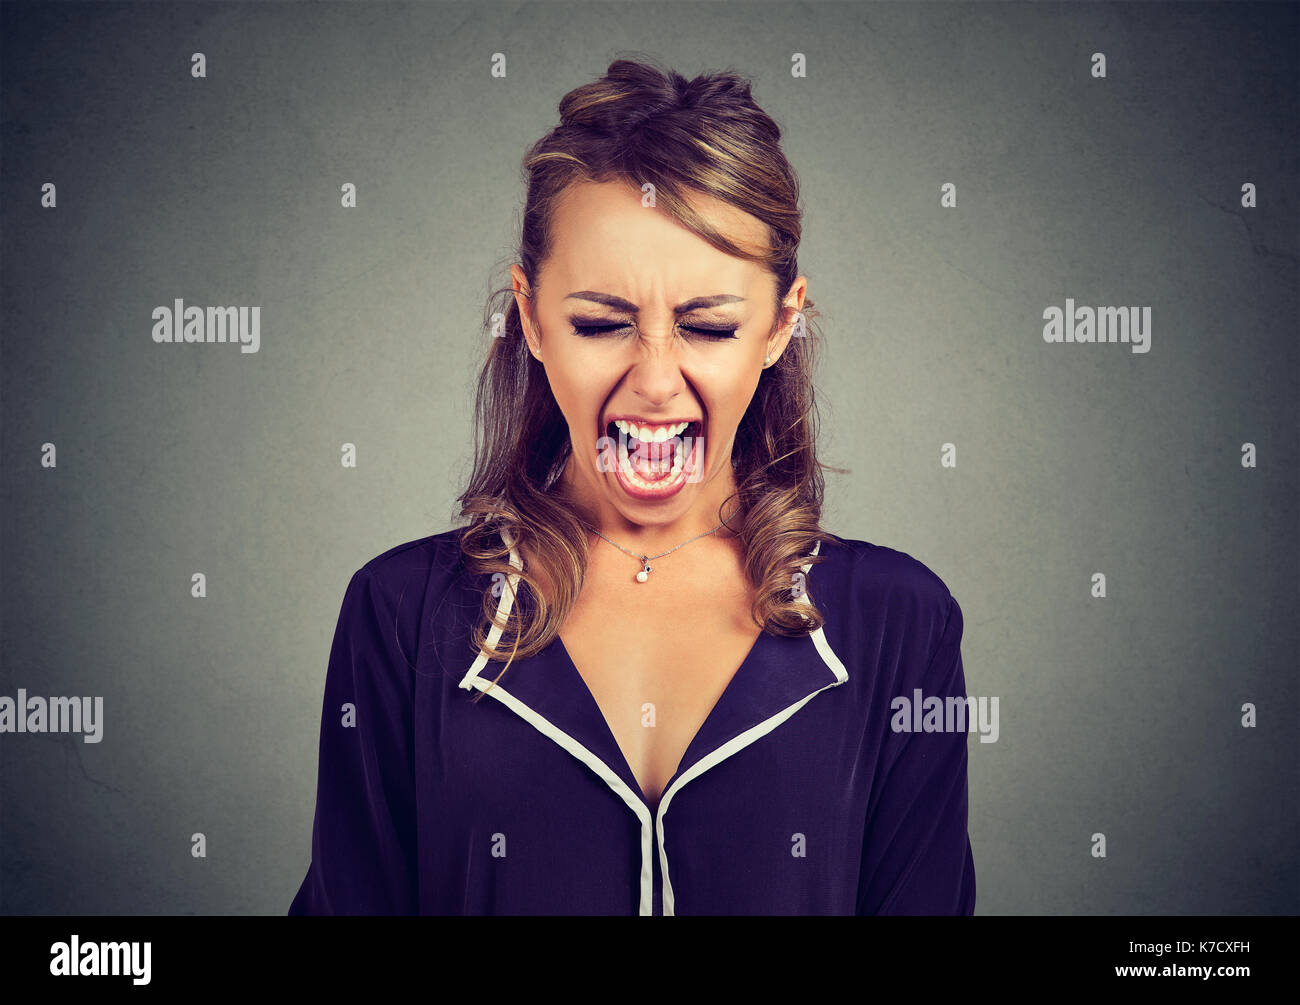 Angry frustrated young woman screaming Stock Photo